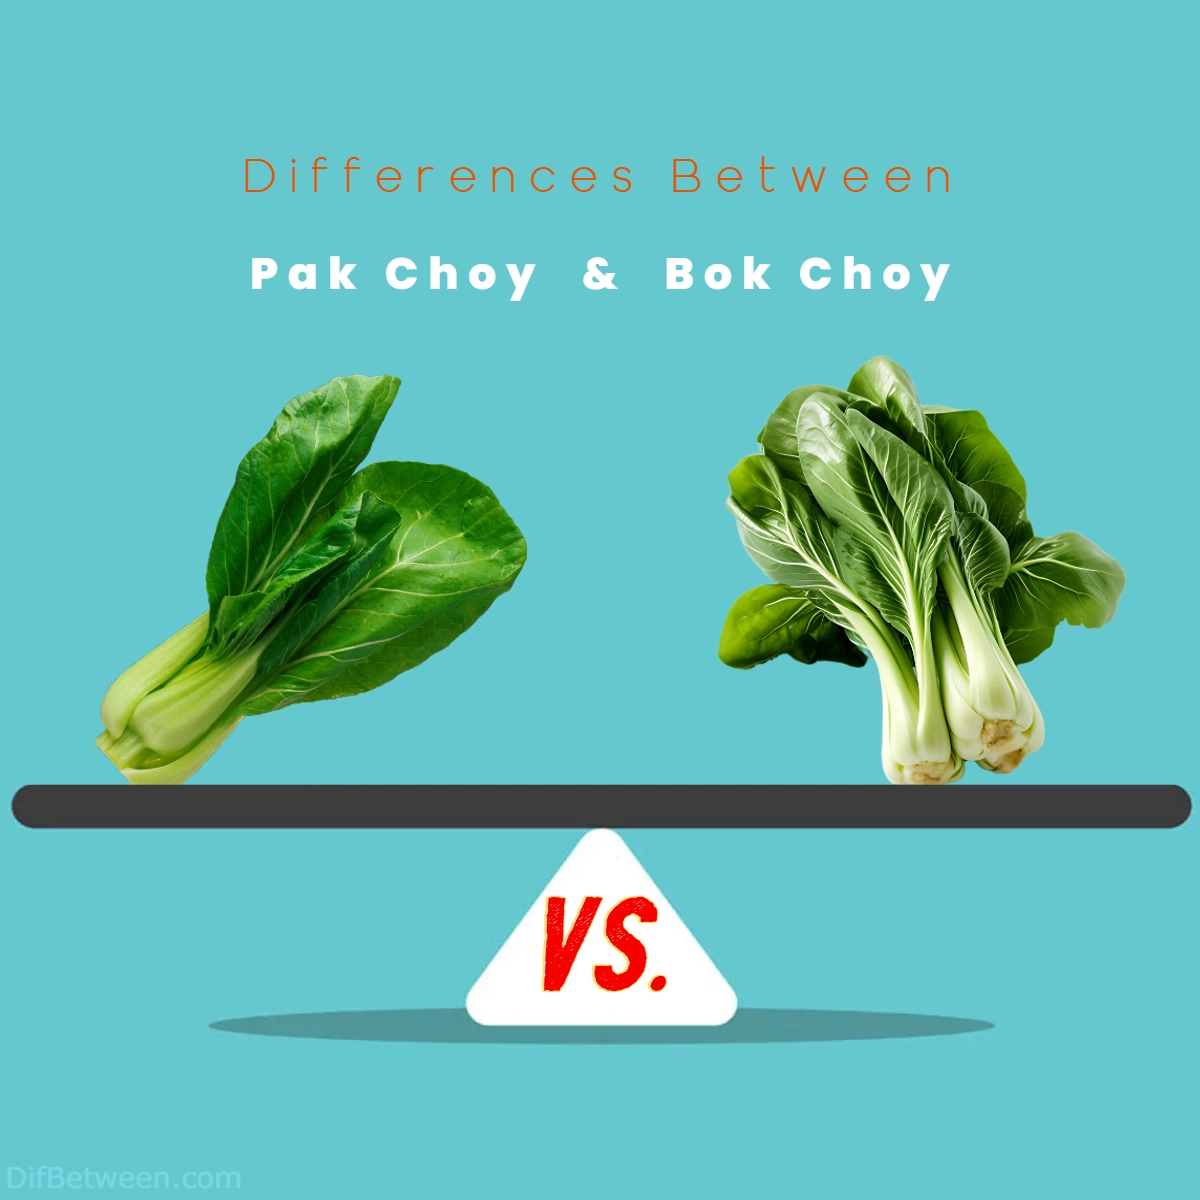 Difference Between Pak Choy and Bok Choy